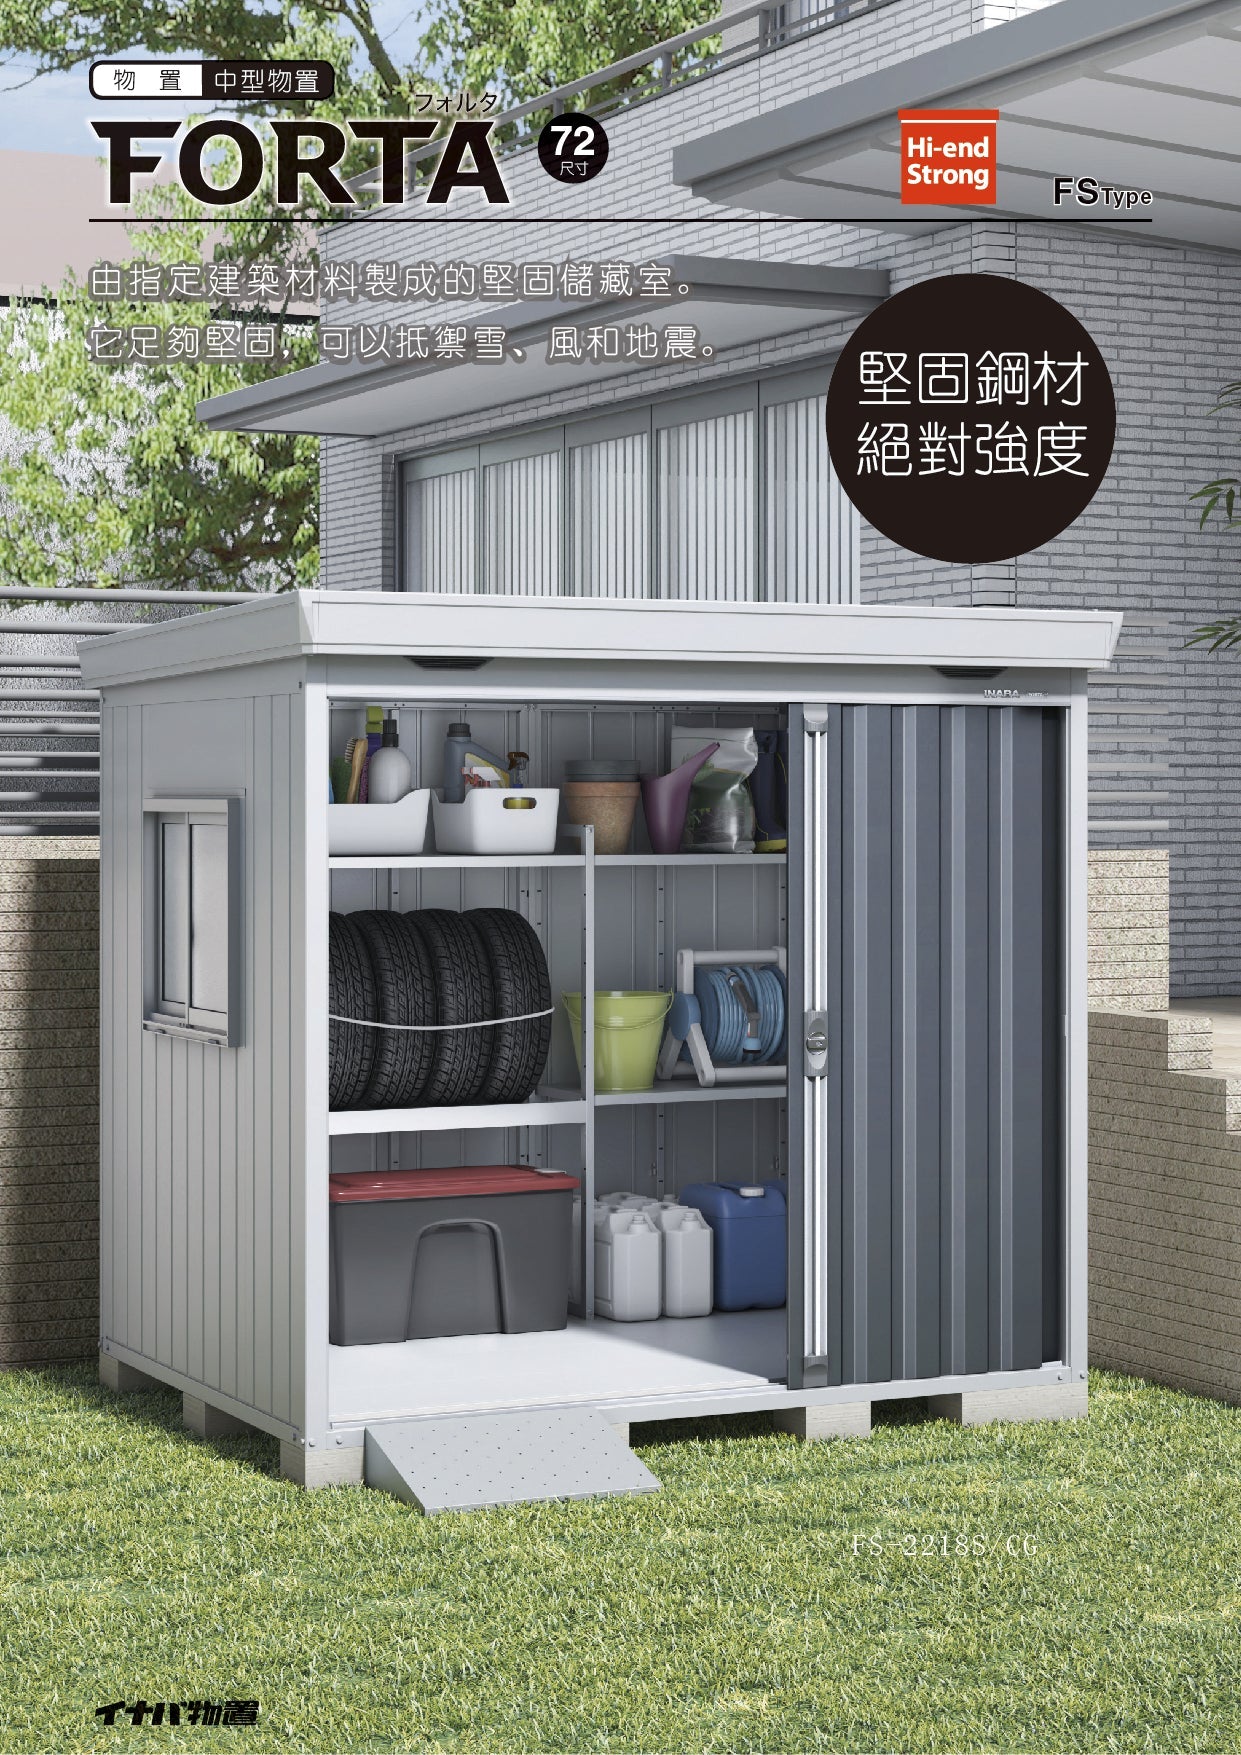 *Pre-order* Inaba Outdoor Storage FS-1426S (W1480xD2810xH2085mm) 8.671 m3